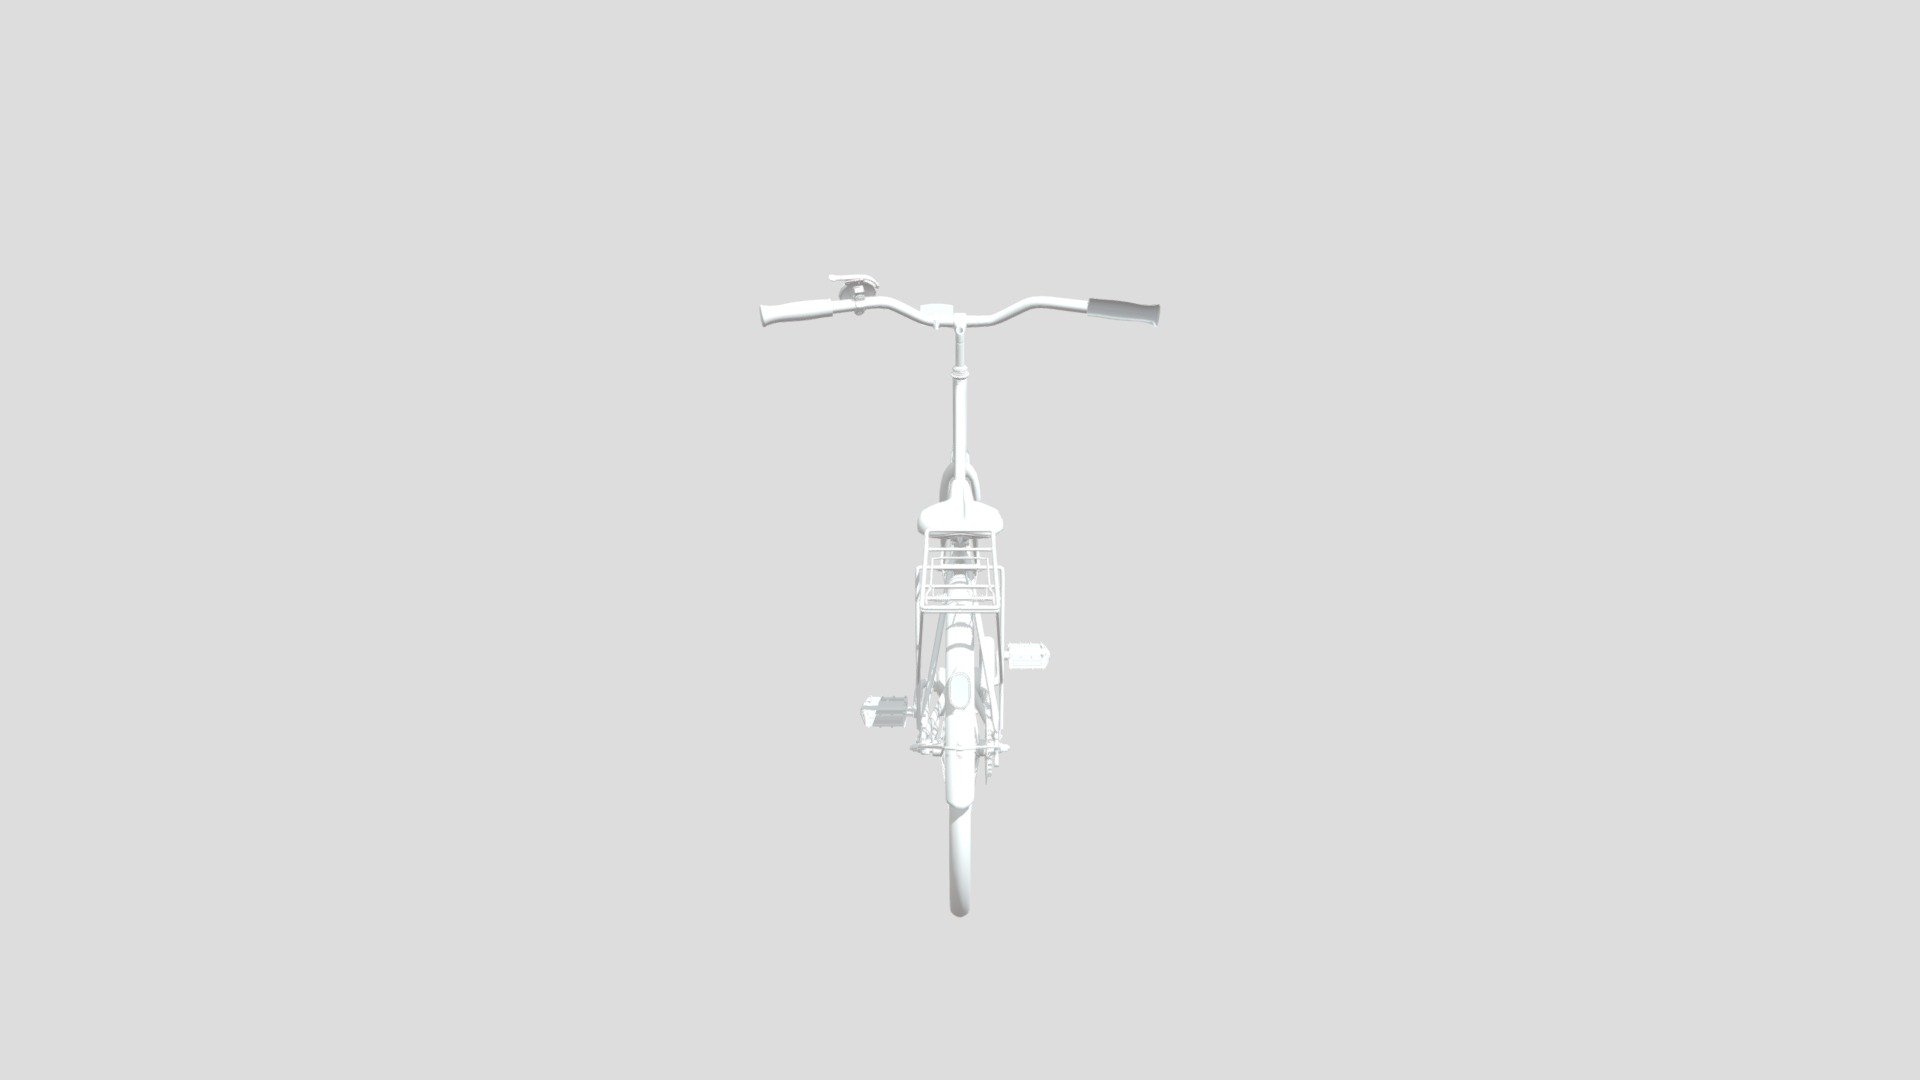 Cruiser bike model I made to test myself. 
Chain, wheels, pedals, handles, seat, and bell rigged for animation 3d model